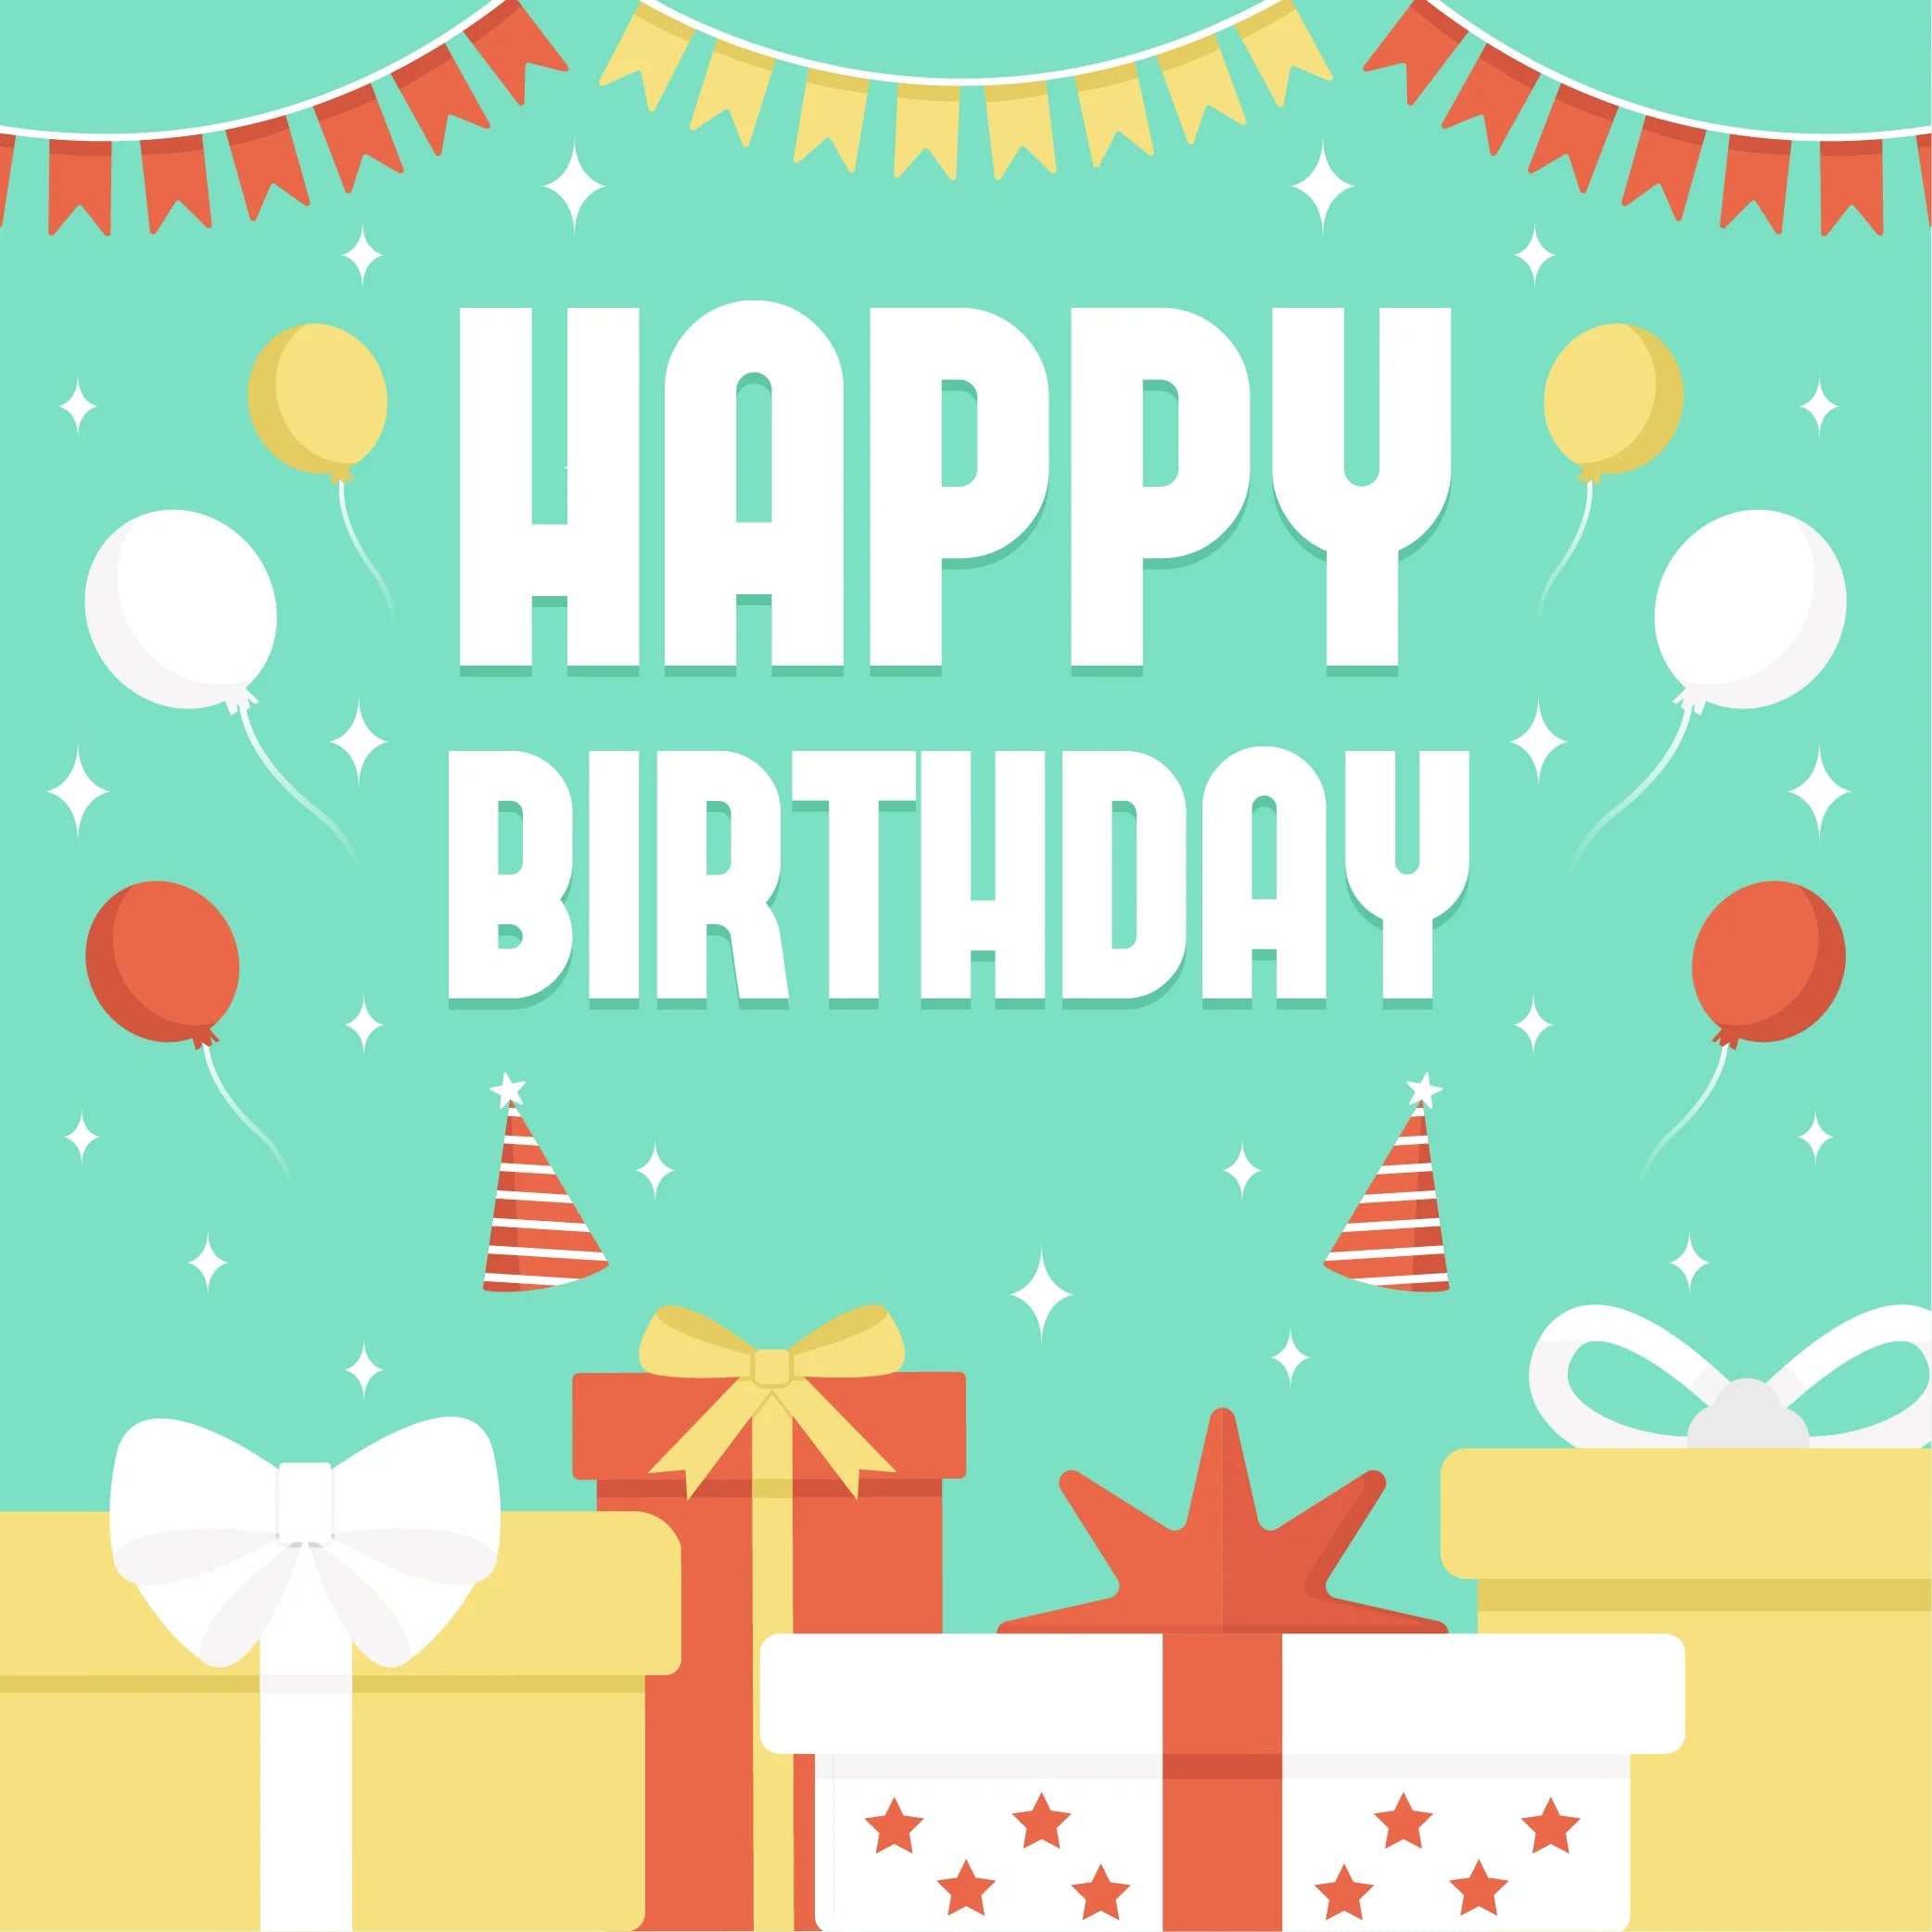 Happy Birthday Collection.webp__PID:6fd187c7-279a-4a1f-84e8-483afe862869